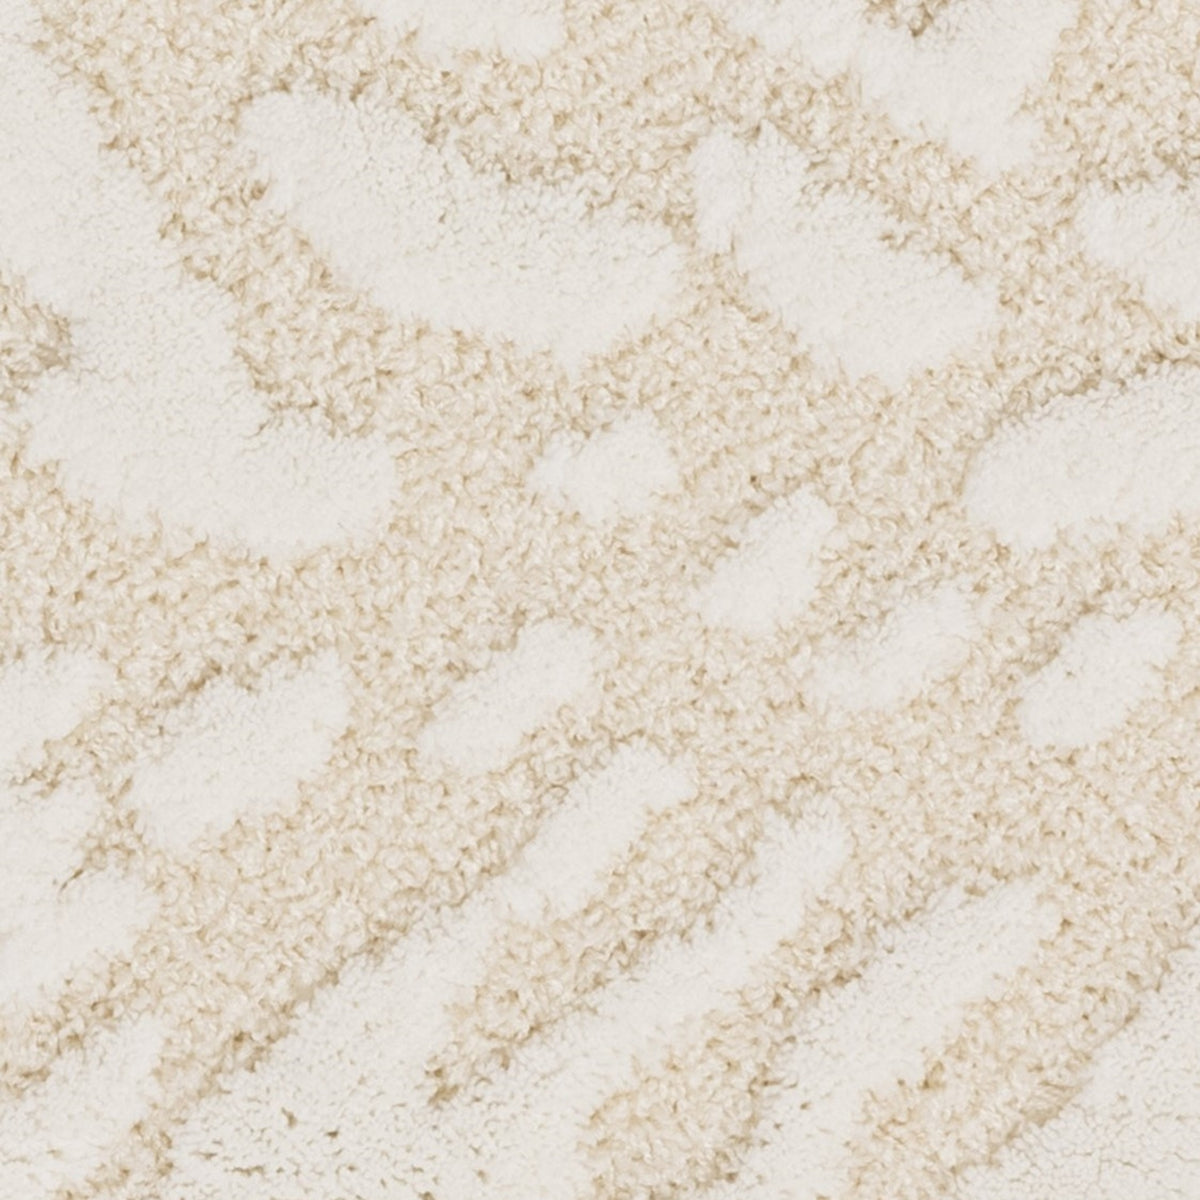 Swatch Sample of Abyss Habidecor Flow Bath Rugs in Color Ivory (103)